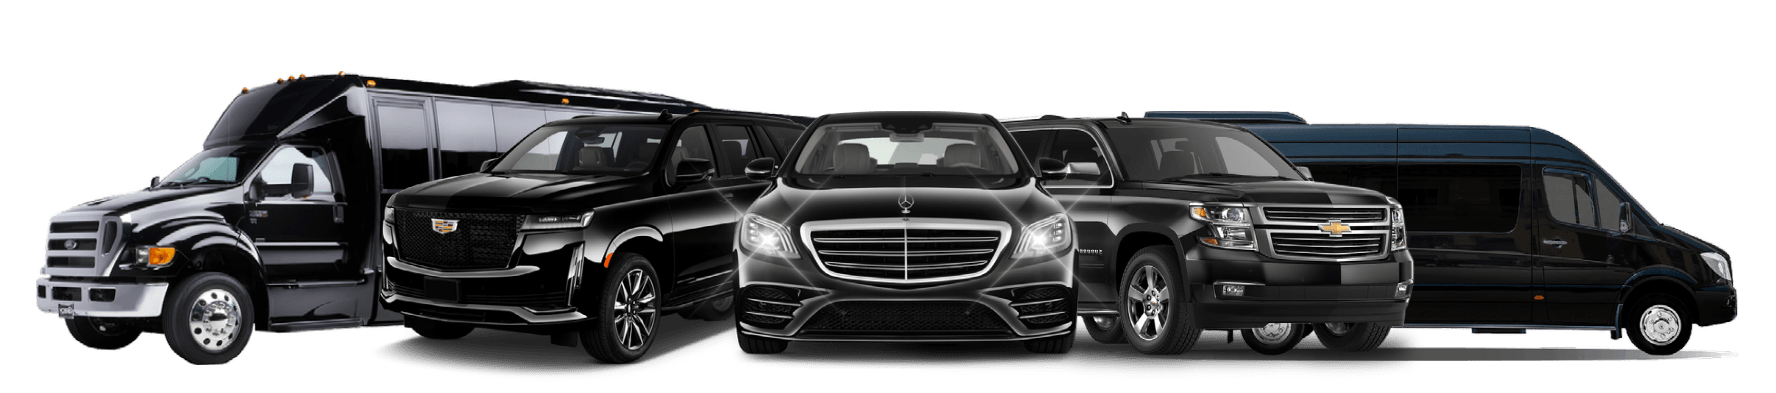 Boston Corporate Limo and other fleets